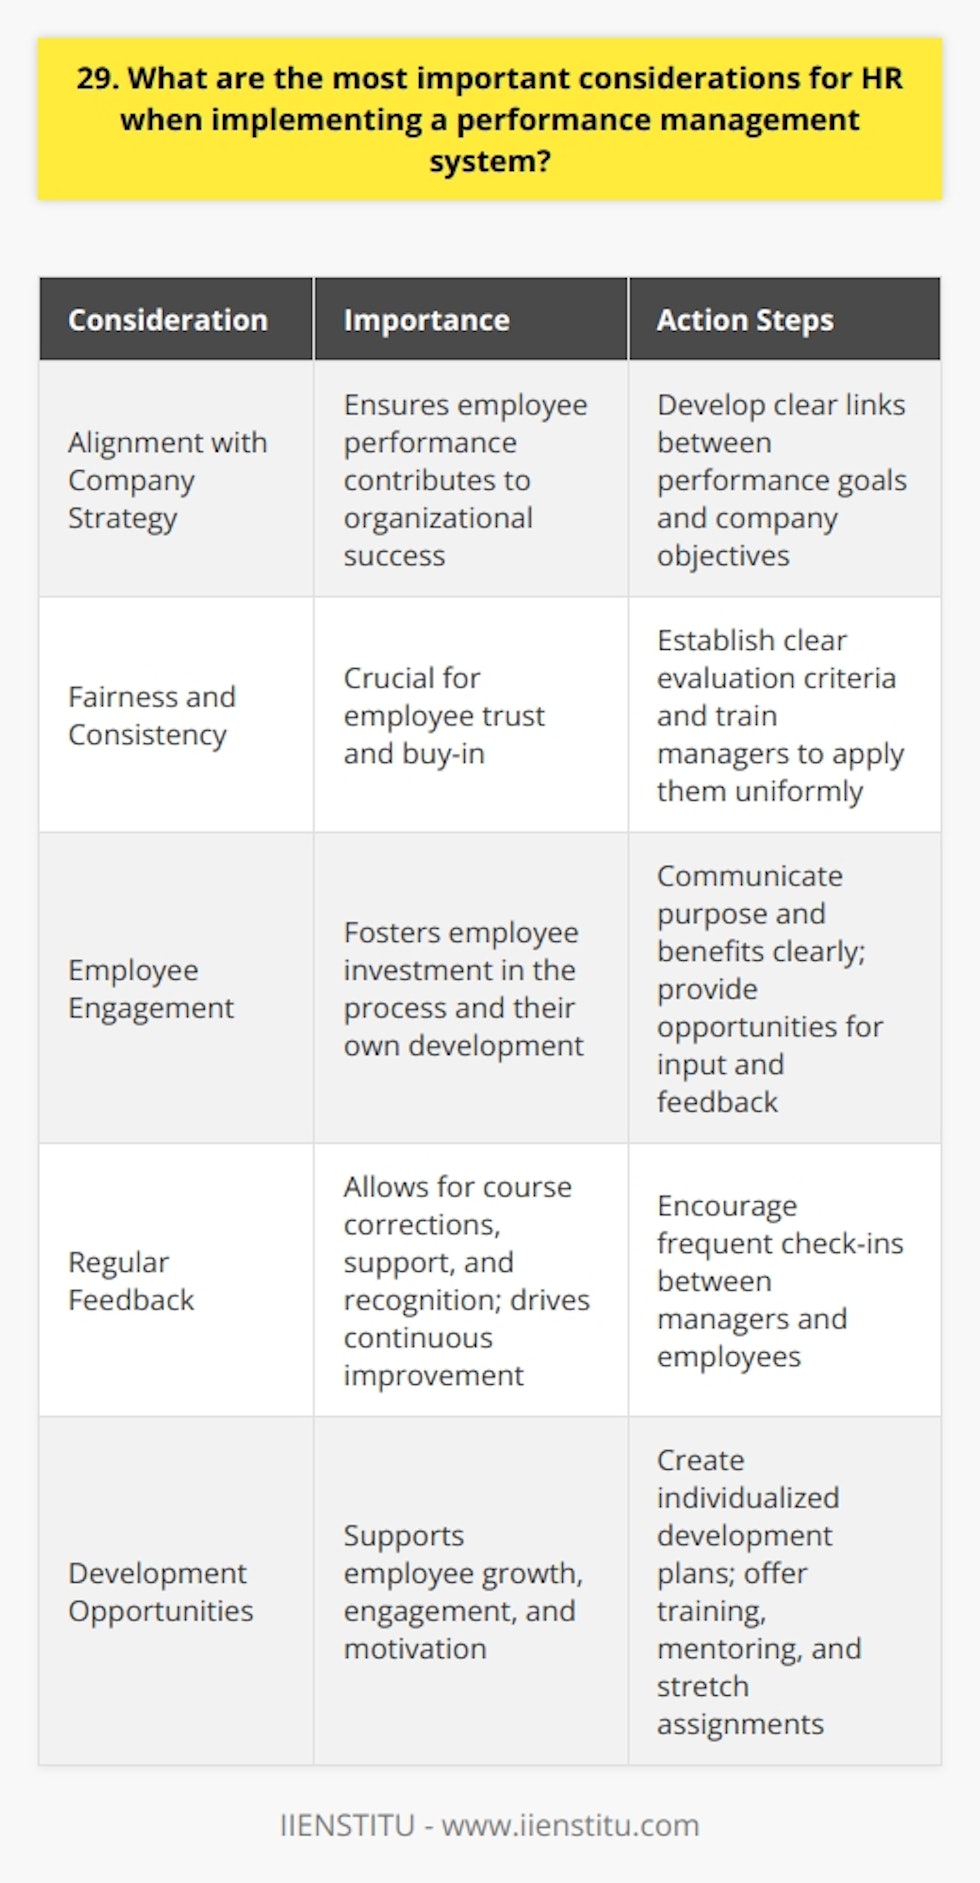 When implementing a performance management system, HR must consider several critical factors. First and foremost, the system should align with the companys overall strategy and goals. This ensures that employee performance contributes to organizational success. Fairness and Consistency The performance management system must be fair and consistent across all employees. HR should establish clear criteria for evaluating performance and apply them uniformly. Managers should receive training to minimize bias and subjectivity in their assessments. Employee Engagement Engaging employees in the performance management process is crucial. HR should communicate the systems purpose and benefits clearly. Employees should have opportunities to provide input and feedback throughout the process. When workers feel invested, theyre more likely to embrace the system. Regular Feedback Performance management shouldnt be a once-a-year event. HR should encourage regular feedback between managers and employees. Frequent check-ins allow for course corrections, support, and recognition. Ongoing dialogue fosters growth and improvement. Development Opportunities A strong performance management system identifies areas for employee development. HR should work with managers to create individualized development plans. Offering training, mentoring, and stretch assignments helps employees acquire new skills and advance their careers. When people see a path forward, theyre more engaged and motivated. In my experience, a well-designed performance management system is a powerful tool. It aligns individual efforts with company objectives, supports employee growth, and drives business results. By considering these key factors, HR can create a system that benefits both employees and the organization.